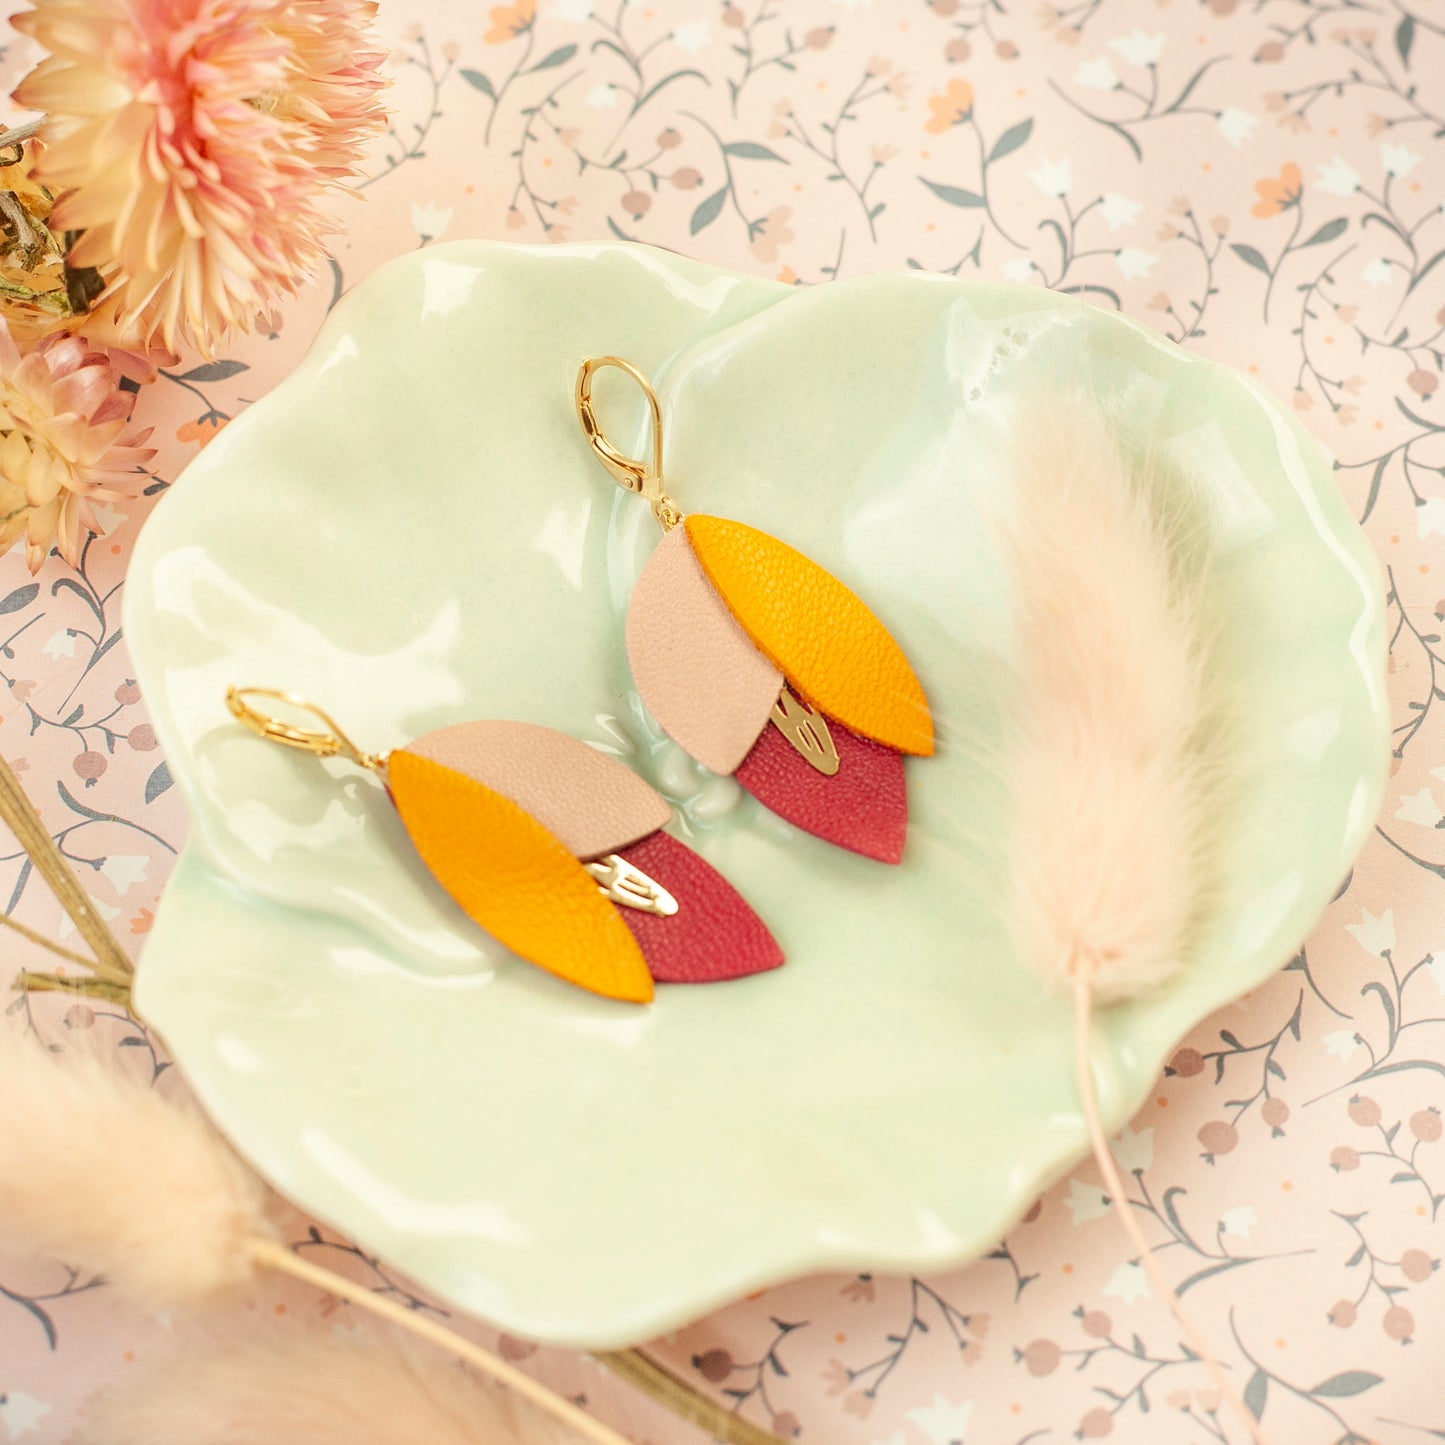 Flower earrings in orange, red and pink leather